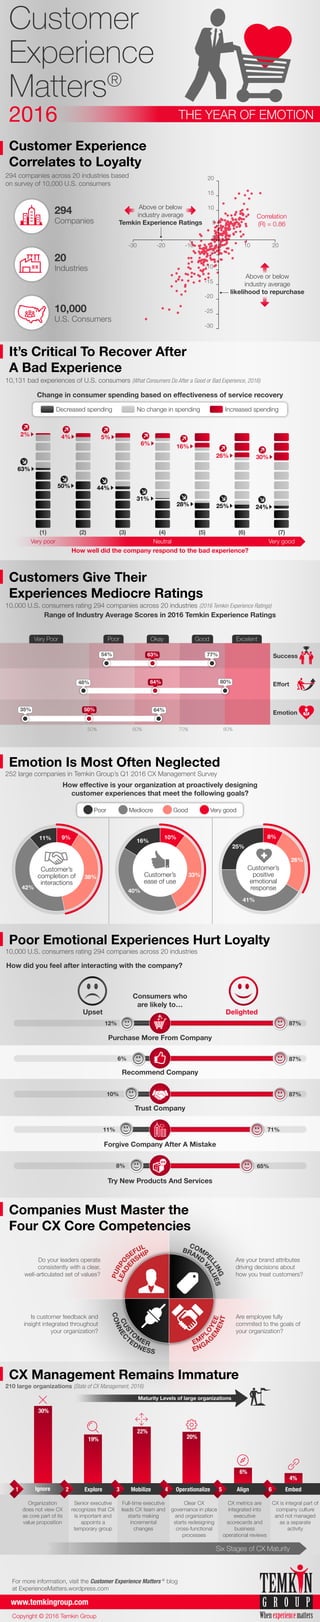 Customer Experience
Correlates to Loyalty
294 companies across 20 industries based
on survey of 10,000 U.S. consumers
It’s Critical To Recover After
A Bad Experience
10,131 bad experiences of U.S. consumers (What Consumers Do After a Good or Bad Experience, 2016)
10,000 U.S. consumers rating 294 companies across 20 industries (2016 Temkin Experience Ratings)
Customers Give Their
Experiences Mediocre Ratings
Change in consumer spending based on effectiveness of service recovery
Range of Industry Average Scores in 2016 Temkin Experience Ratings
252 large companies in Temkin Group’s Q1 2016 CX Management Survey
Emotion Is Most Often Neglected
10,000 U.S. consumers rating 294 companies across 20 industries
Poor Emotional Experiences Hurt Loyalty
Companies Must Master the
Four CX Core Competencies
How effective is your organization at proactively designing
customer experiences that meet the following goals?
210 large organizations (State of CX Management, 2016)
CX Management Remains Immature
How did you feel after interacting with the company?
Consumers who
are likely to…
Very poor Neutral Very good
63%
(1) (2) (3)
50% 60% 70% 80%
(4) (5) (6) (7)
2%
How well did the company respond to the bad experience?
50%
4%
44%
5%
31%
6%
28%
16%
25%
26%
24%
30%
Decreased spending No change in spending Increased spending
Very Poor Poor Okay Good Excelent
Very goodGoodMediocrePoor
Customer’s
ease of use
10%
33%
40%
16%
Customer’s
completion of
interactions
42%
11% 9%
38%
Customer’s
positive
emotional
response
8%
26%
41%
25%
DelightedUpset
Purchase More From Company
Recommend Company
Forgive Company After A Mistake
Trust Company
Try New Products And Services
Do your leaders operate
consistently with a clear,
well-articulated set of values?
Are your brand attributes
driving decisions about
how you treat customers?
Are employee fully
commited to the goals of
your organization?
BRAND
VALUES
COMPE
LLING
LEADE
RSHIP
PURPO
SEFUL
EM
P
LO
YEE
ENGAG
EM
ENT
CUST
O
M
ER
CONNEC
TEDNESS
Maturity Levels of large organizations
1 2 3 4 5 6
Is customer feedback and
insight integrated throughout
your organization?
CX is integral part of
company culture
and not managed
as a separate
activity
Clear CX
governance in place
and organization
starts redesigning
cross-functional
processes
Full-time executive
leads CX team and
starts making
incremental
changes
Senior executive
recognizes that CX
is important and
appoints a
temporary group
Organization
does not view CX
as core part of its
value proposition
CX metrics are
integrated into
executive
scorecards and
business
operational reviews
For more information, visit the Customer Experience Matters ®
blog
at ExperienceMatters.wordpress.com
www.temkingroup.com
Copyright © 2016 Temkin Group
Customer
Experience
Matters®
THE YEAR OF EMOTION2016
294
Companies
20
Industries
10,000
U.S. Consumers
87%
87%
87%
71%
65%
Success
Emotion
Effort
35%
48%
54% 63% 77%
64% 80%
50% 64%
Ignore
30%
Explore
19%
Mobilize
22%
Operationalize
20%
Embed
4%
Align
6%
12%
6%
10%
11%
8%
Six Stages of CX Maturity
NEW
-30
-30
-25
-20
-15
-10
-5
0
5
10
15
20
-20 -10 0 10 20
Above or below
industry average
Temkin Experience Ratings
Correlation
(R) = 0.86
Above or below
industry average
likelihood to repurchase
 